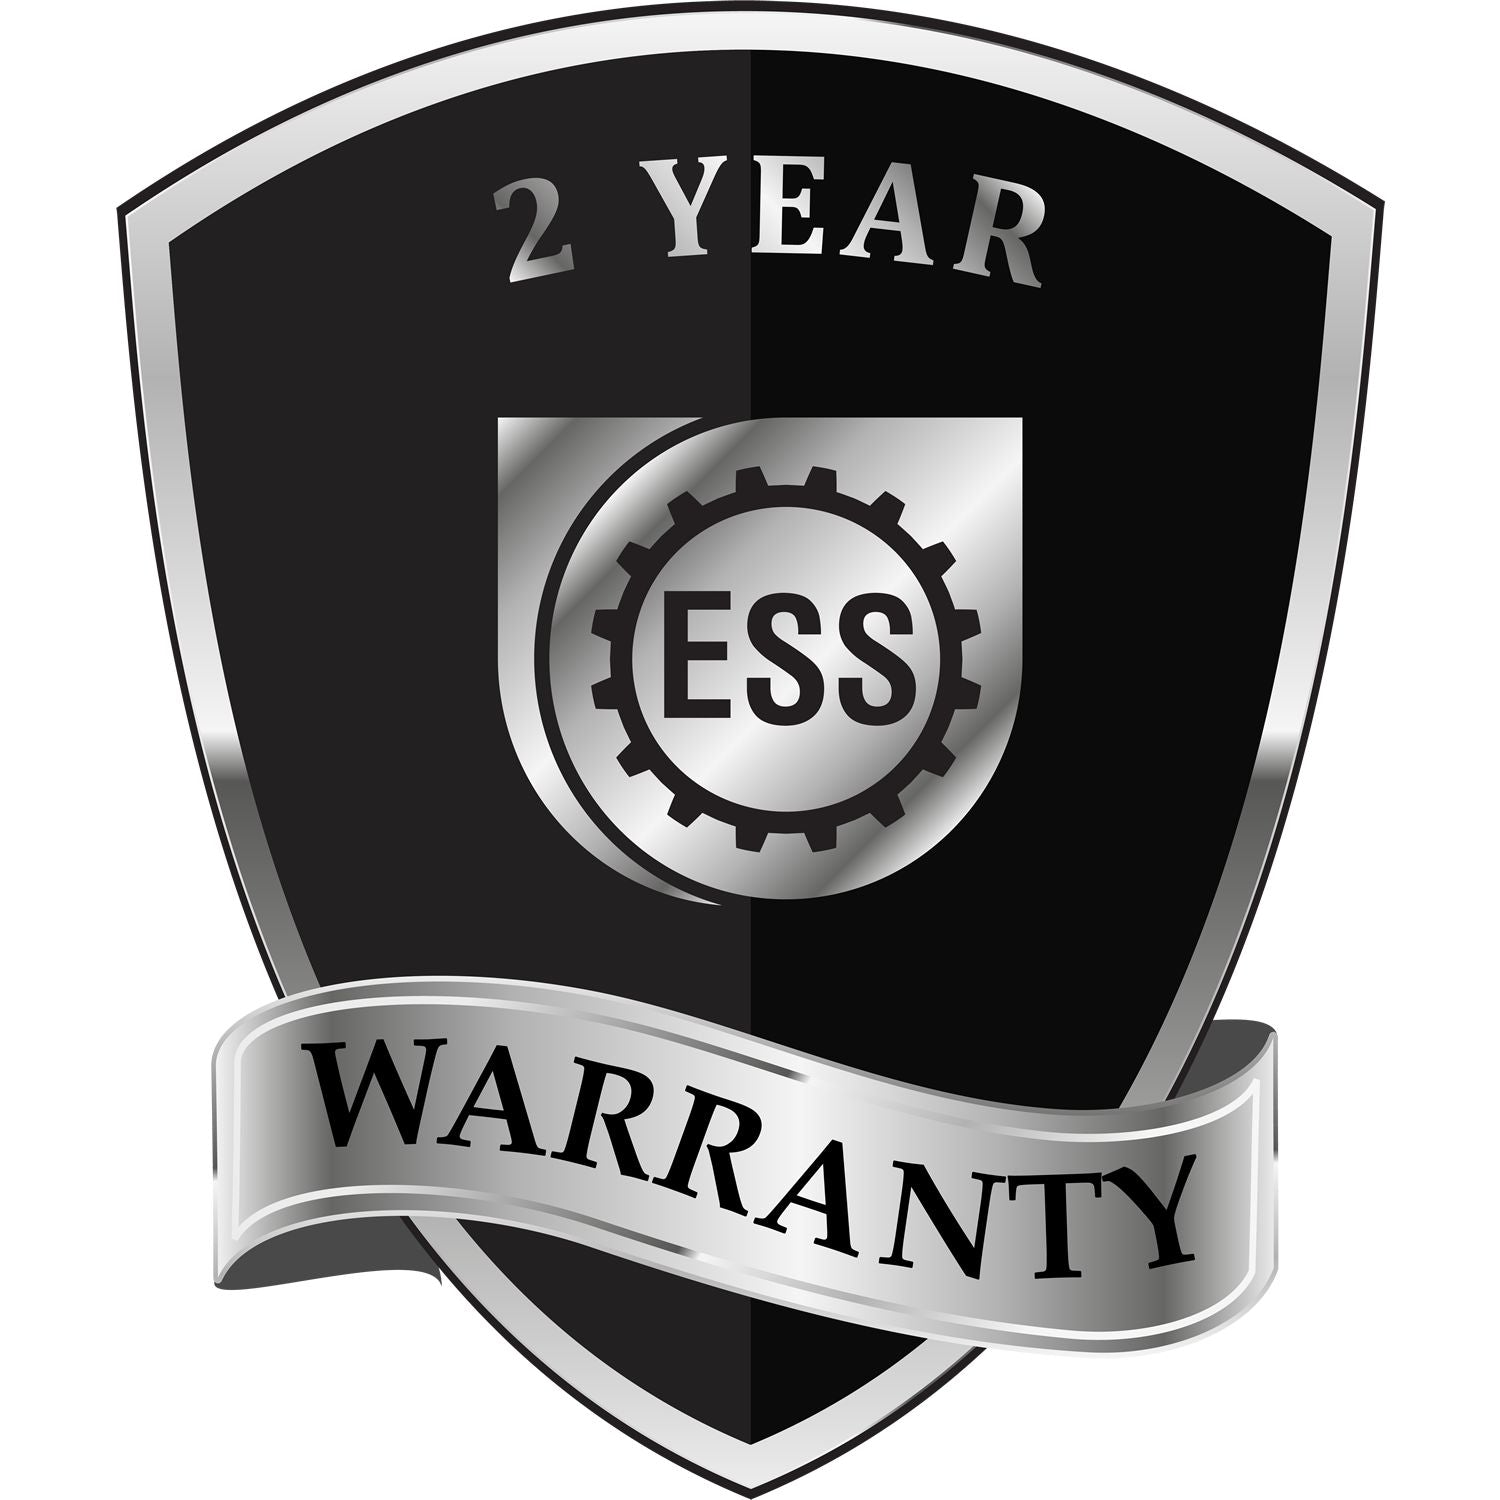 A badge or emblem showing a warranty icon for the Heavy Duty Cast Iron Oklahoma Land Surveyor Seal Embosser